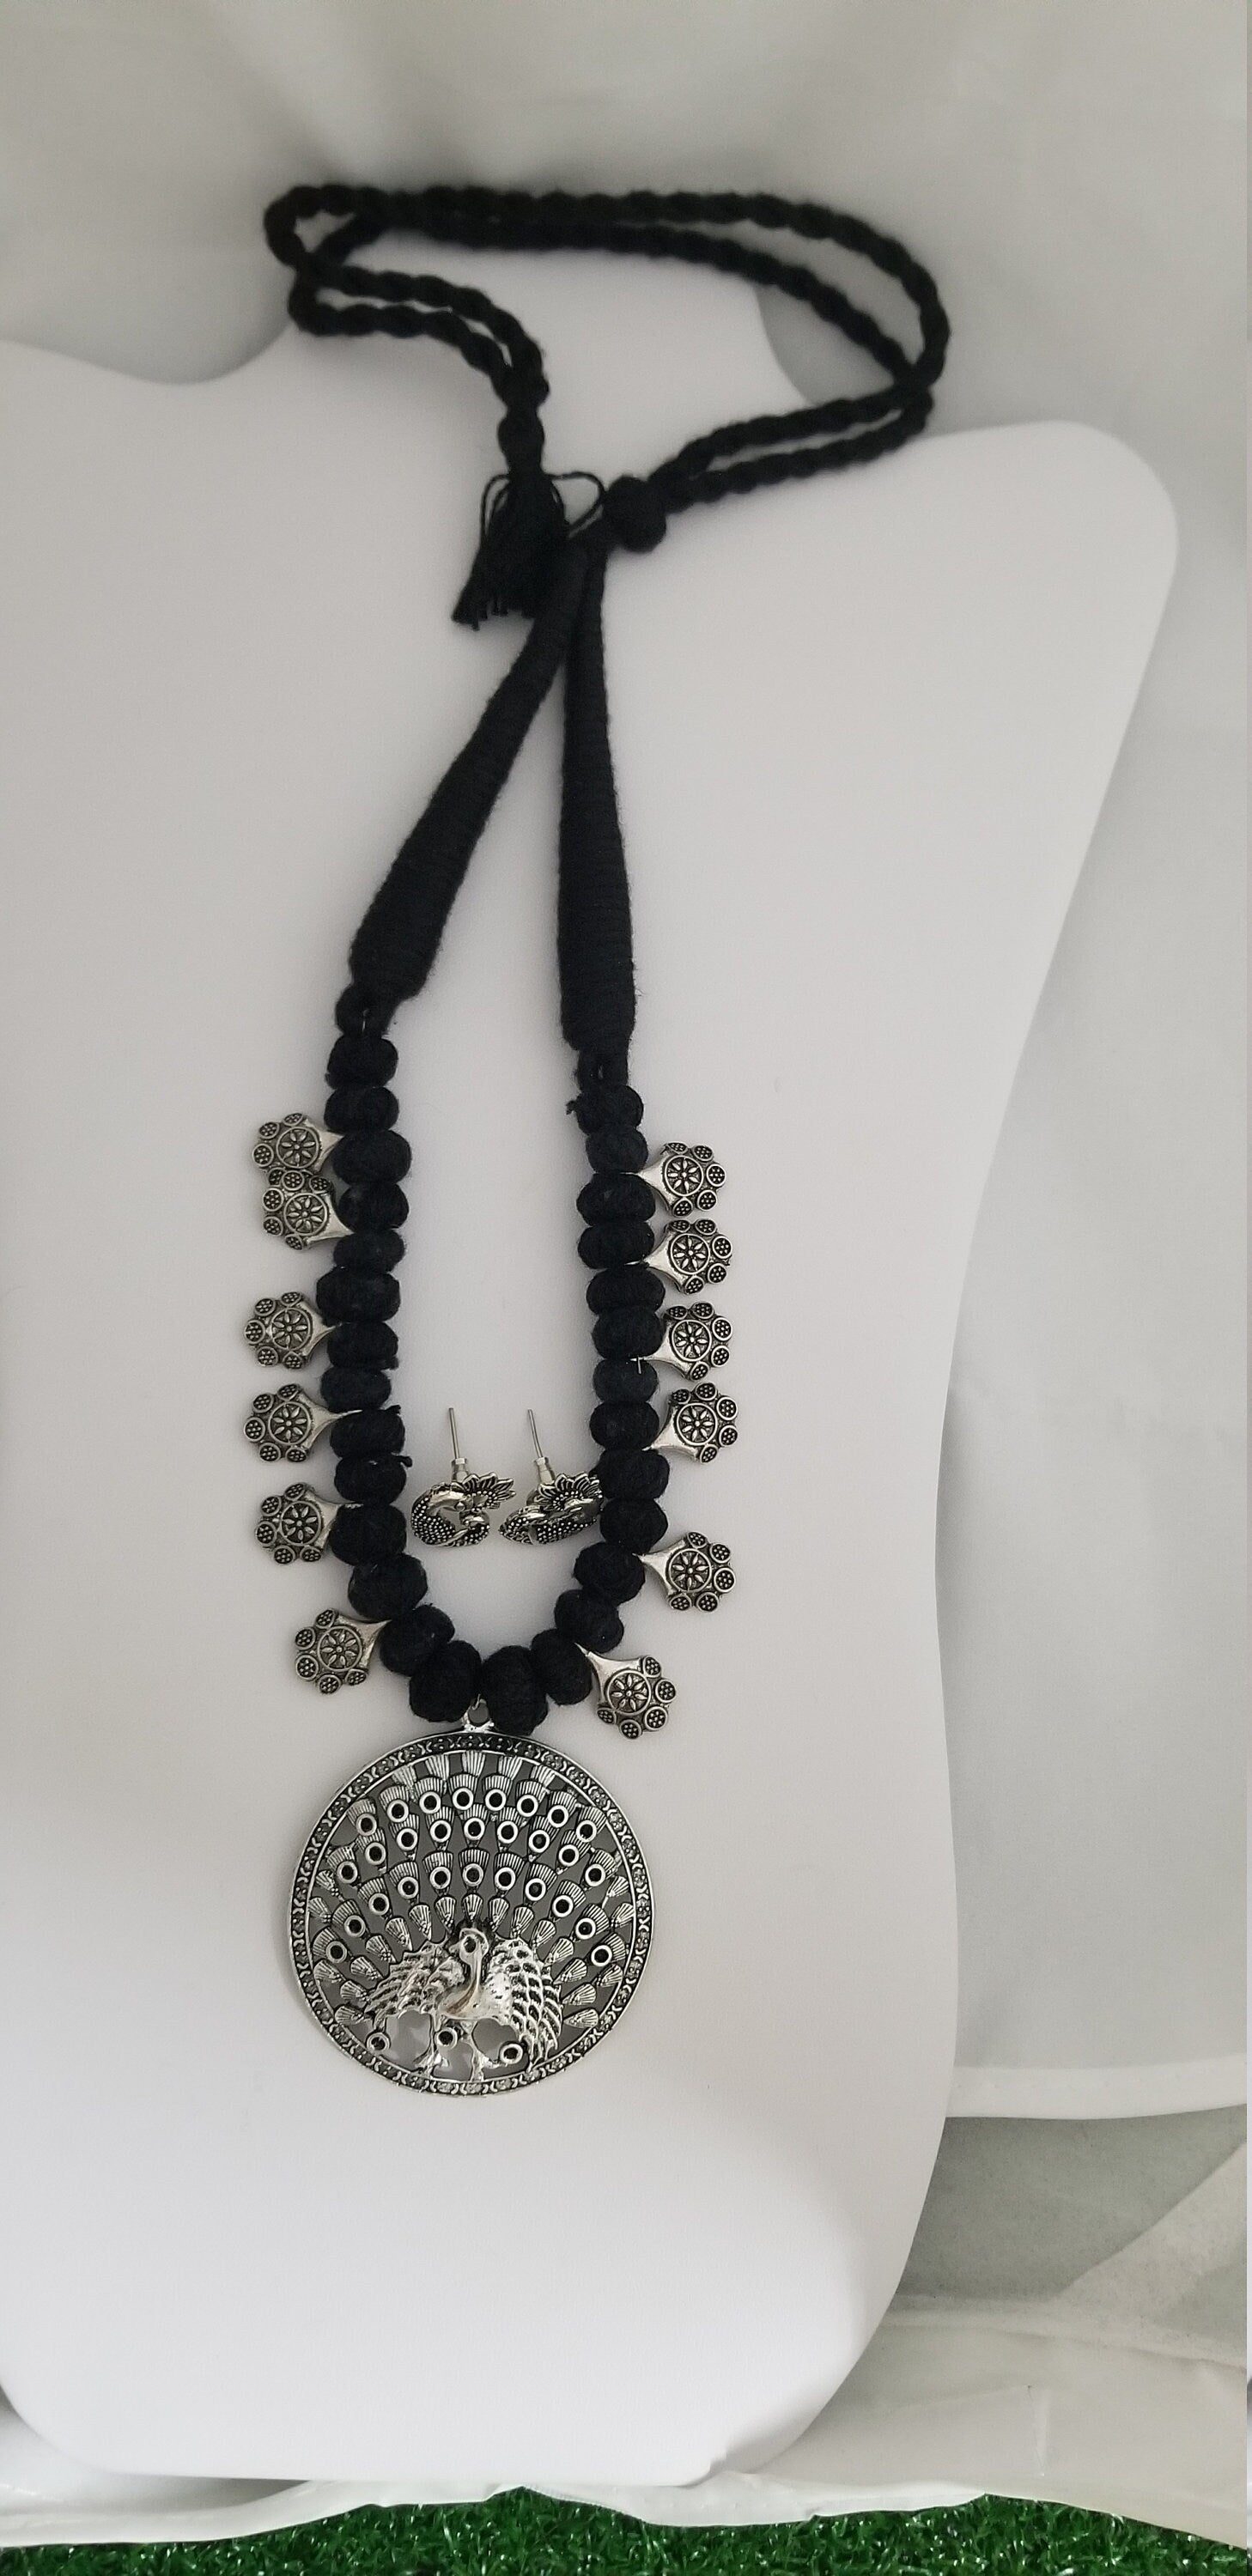 Antique Silver Peacock Pendent with Thread bead chain with Peacock Earrings - Ethnic Jewelry